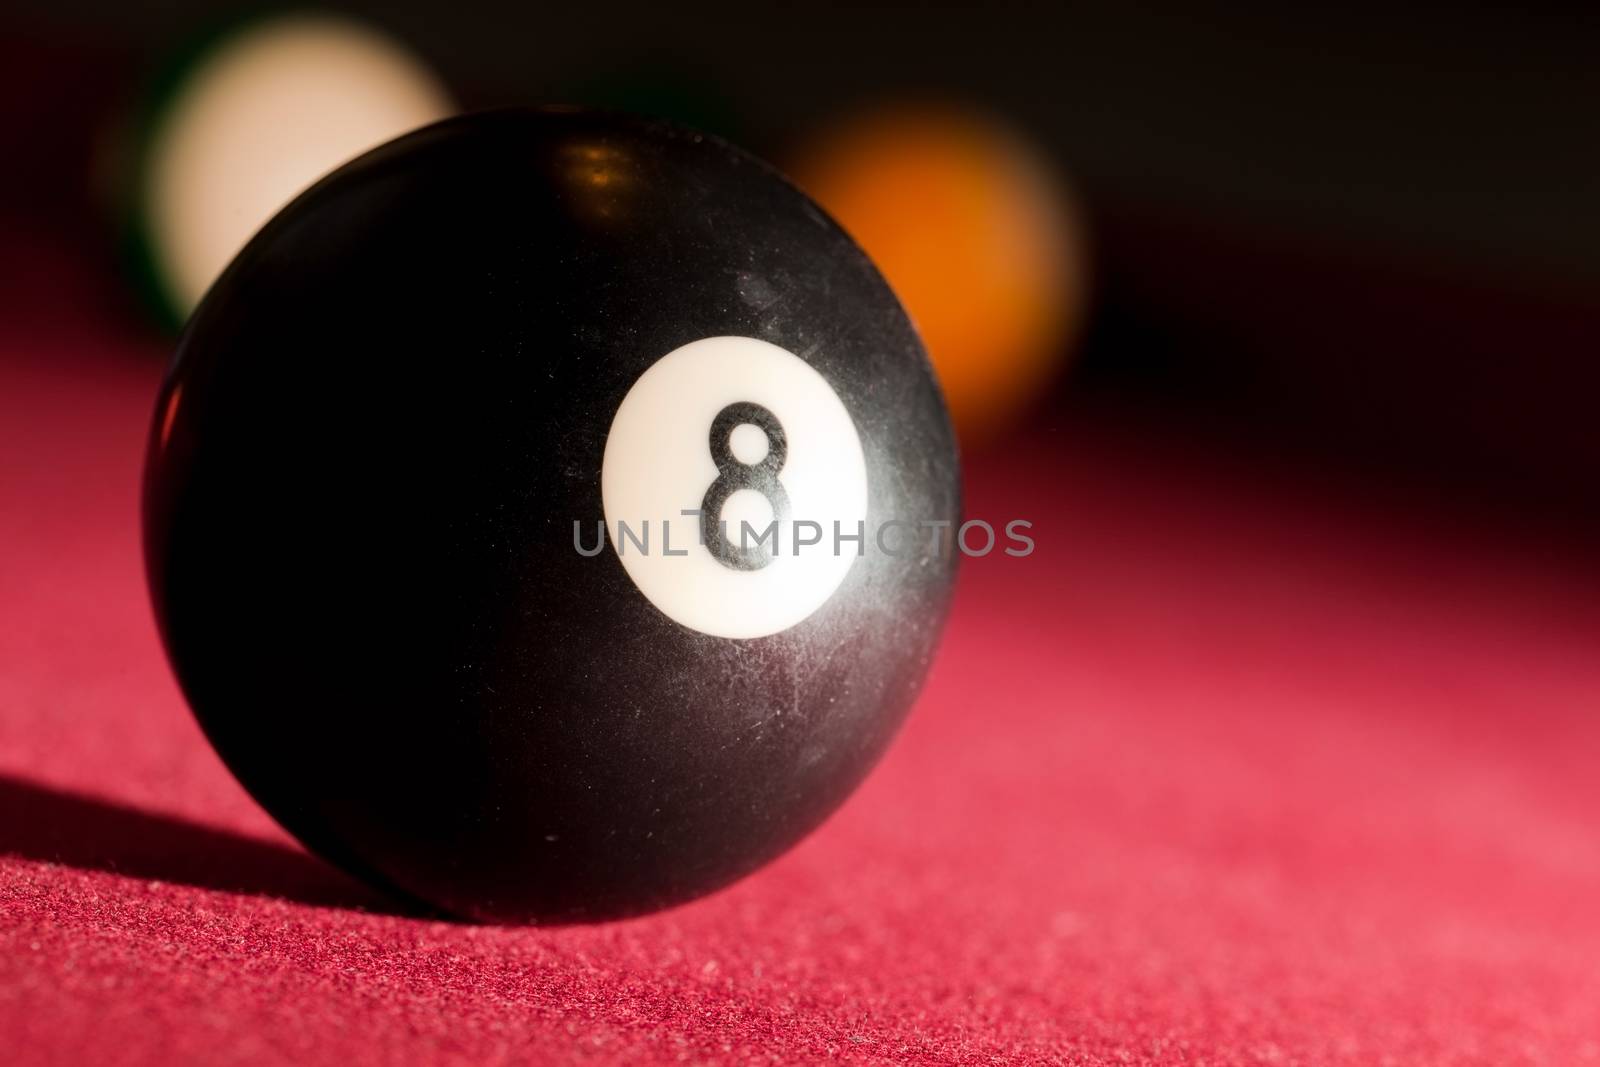 Billards pool or snooker game. The black eight ball. Red cloth table